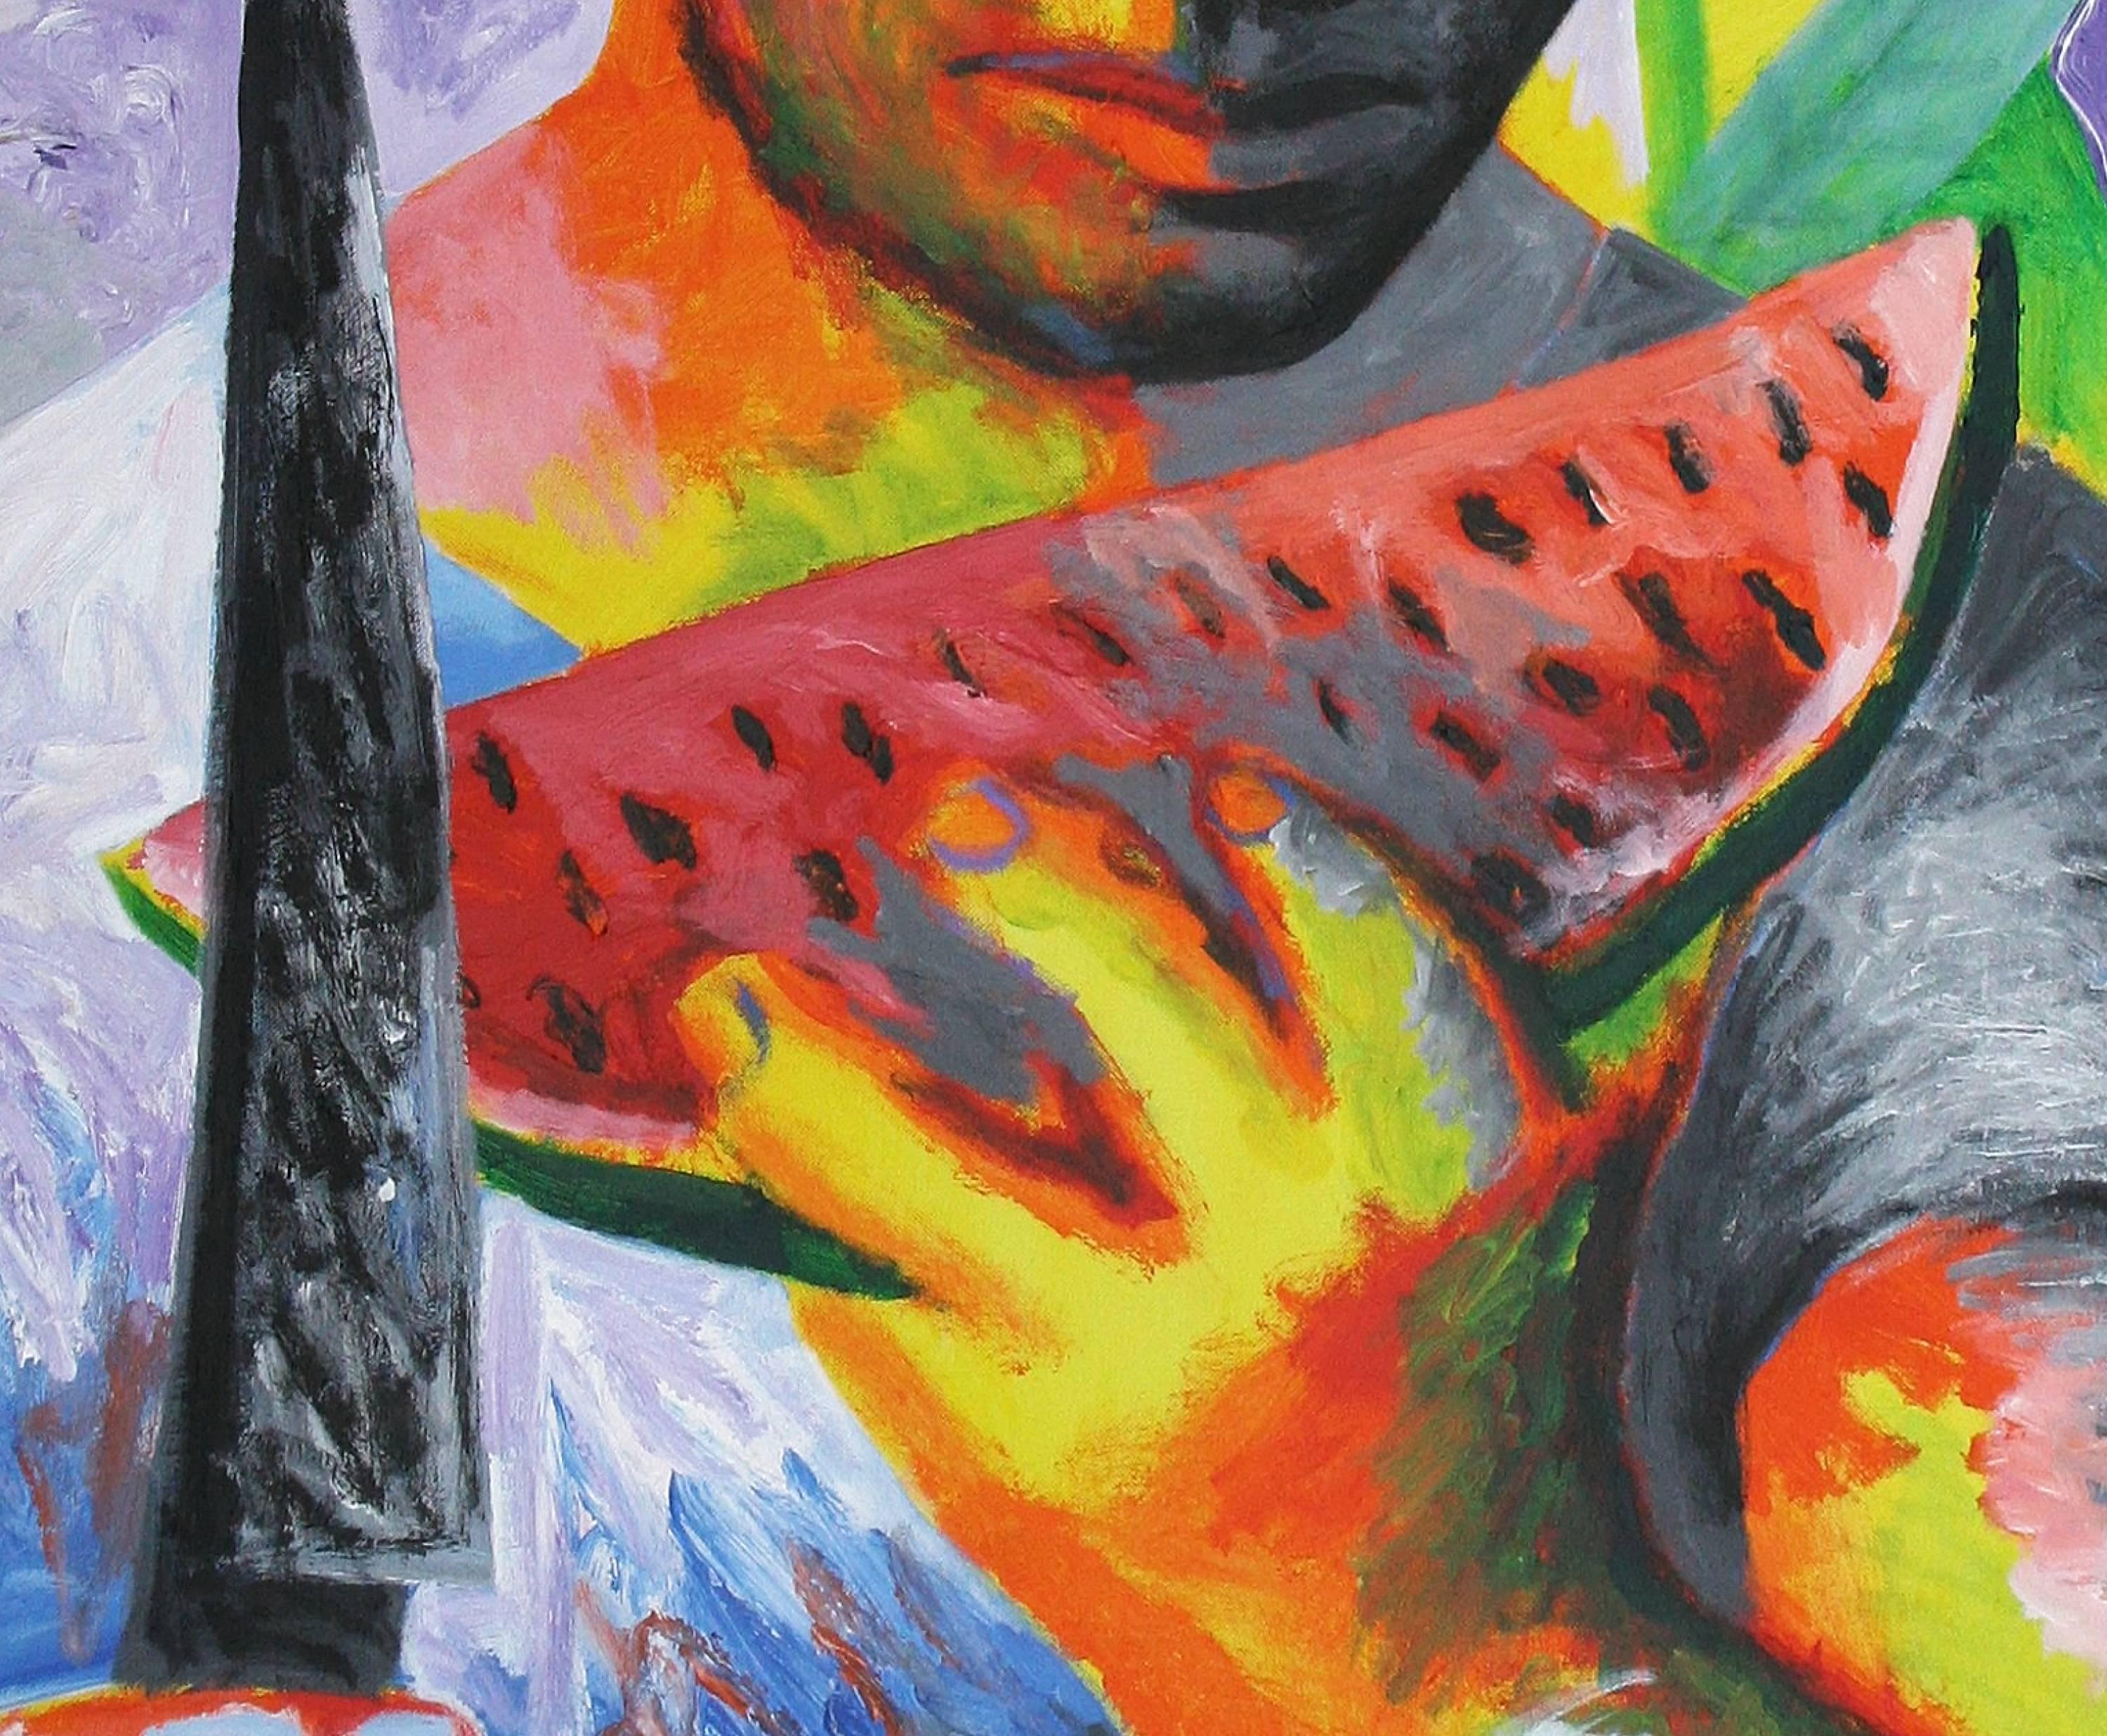 Watermelon, 2013
Acrylic on canvas (Signed on reverse)
41 3/10 H × 28 1/2 W in
105 H × 72.5 W cm

The artwork 